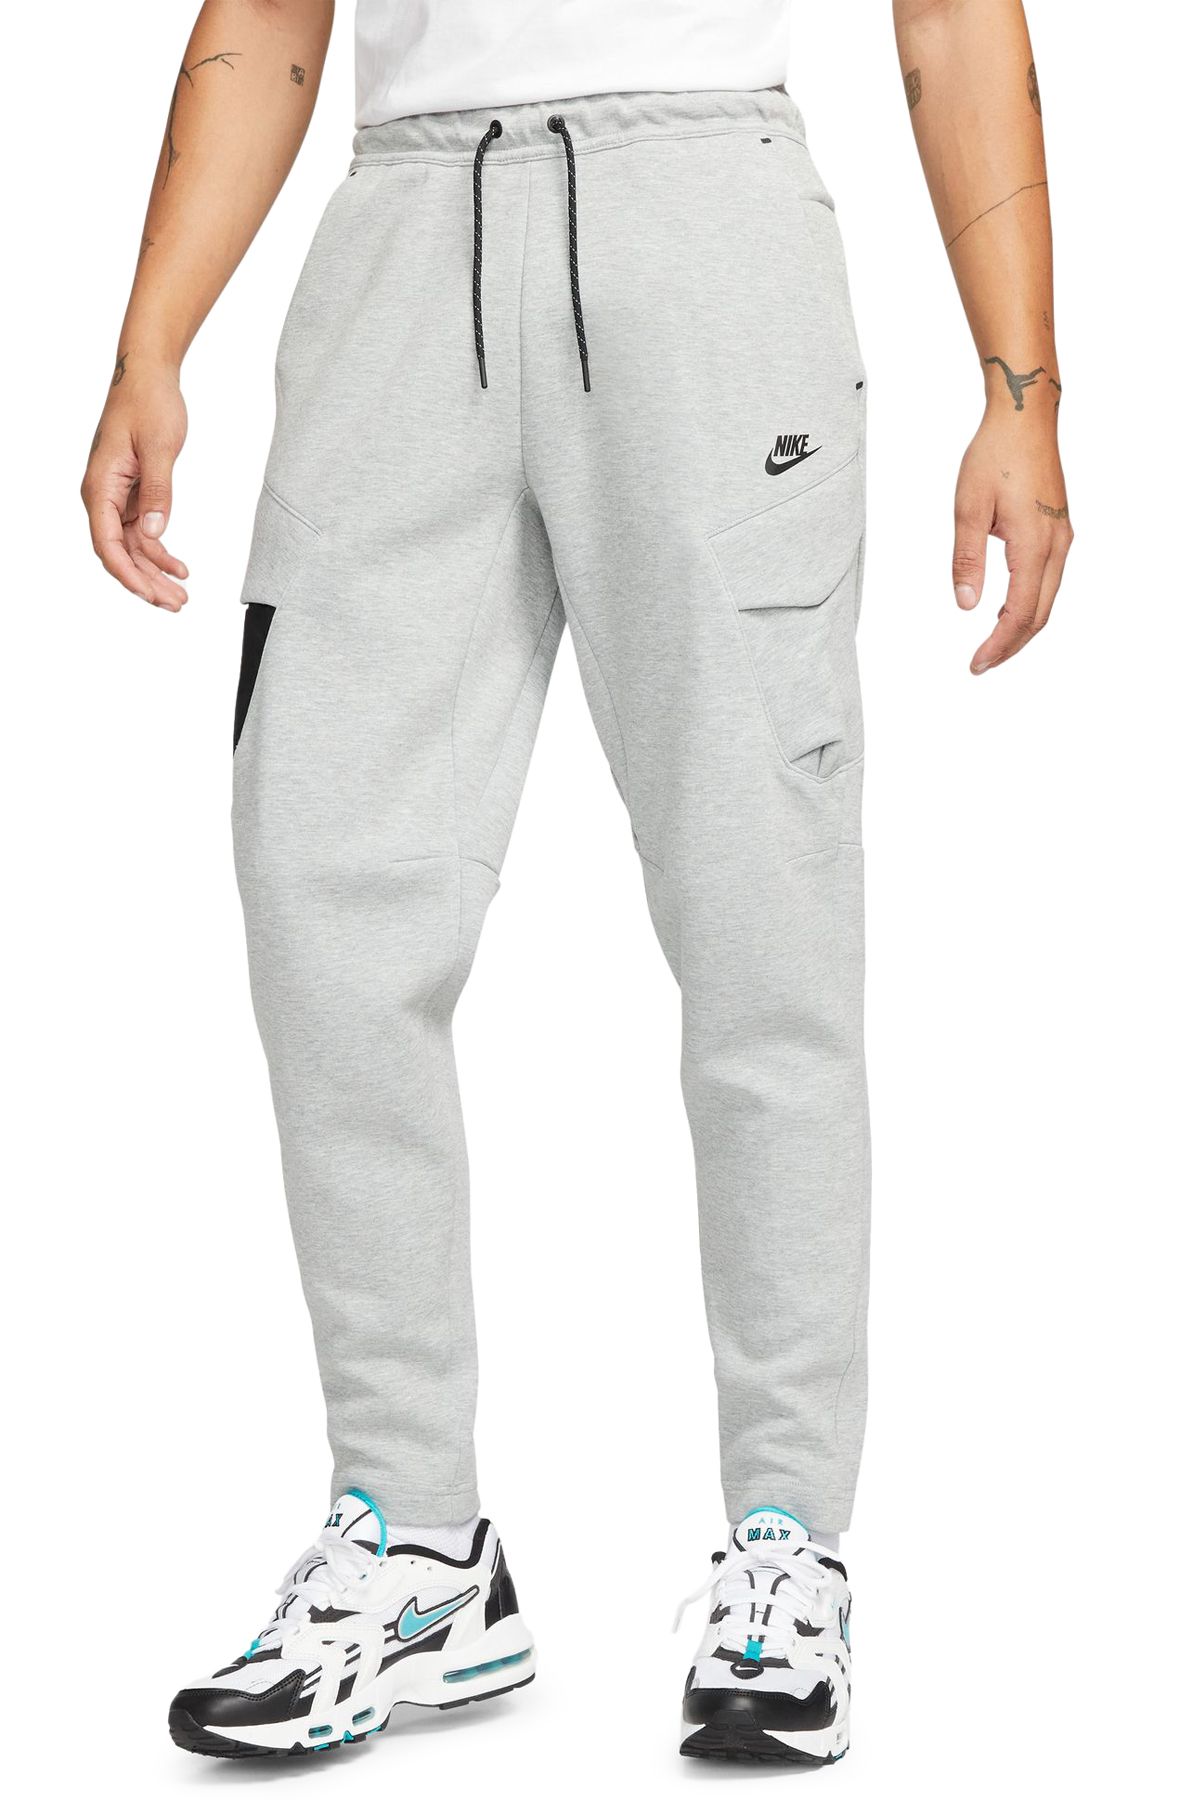 Nike NBA Compression tights  Nike tech sweatsuit, Running sleeves